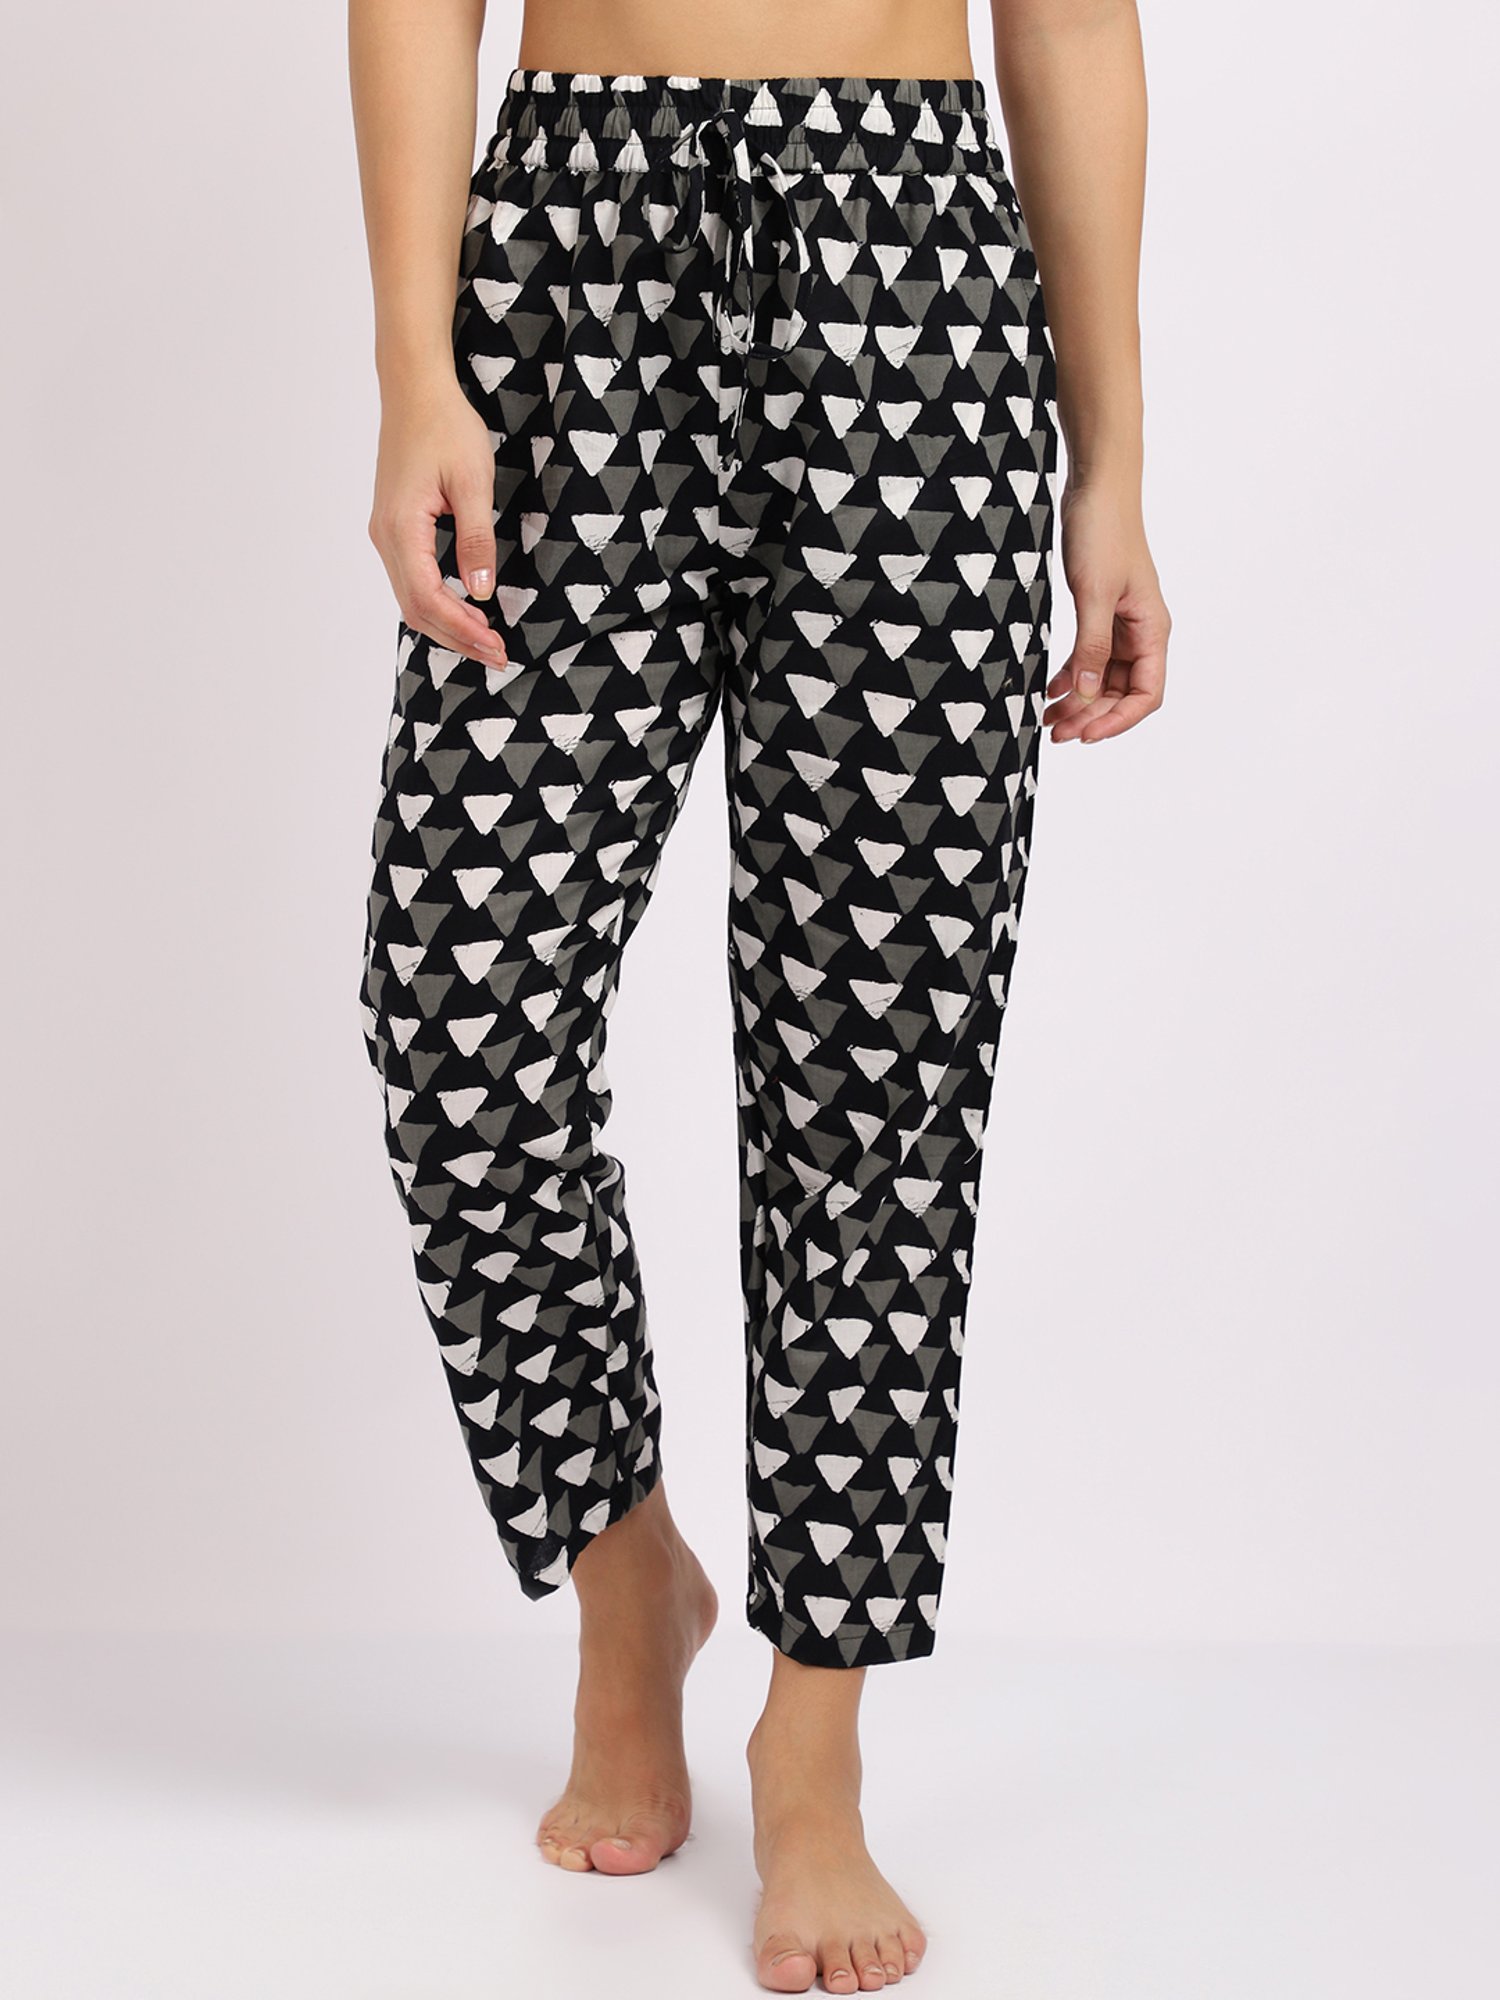 Black  Red Checked Premium Cotton Lounge Pant Pajama Online In India Color  Black SizeShirt M